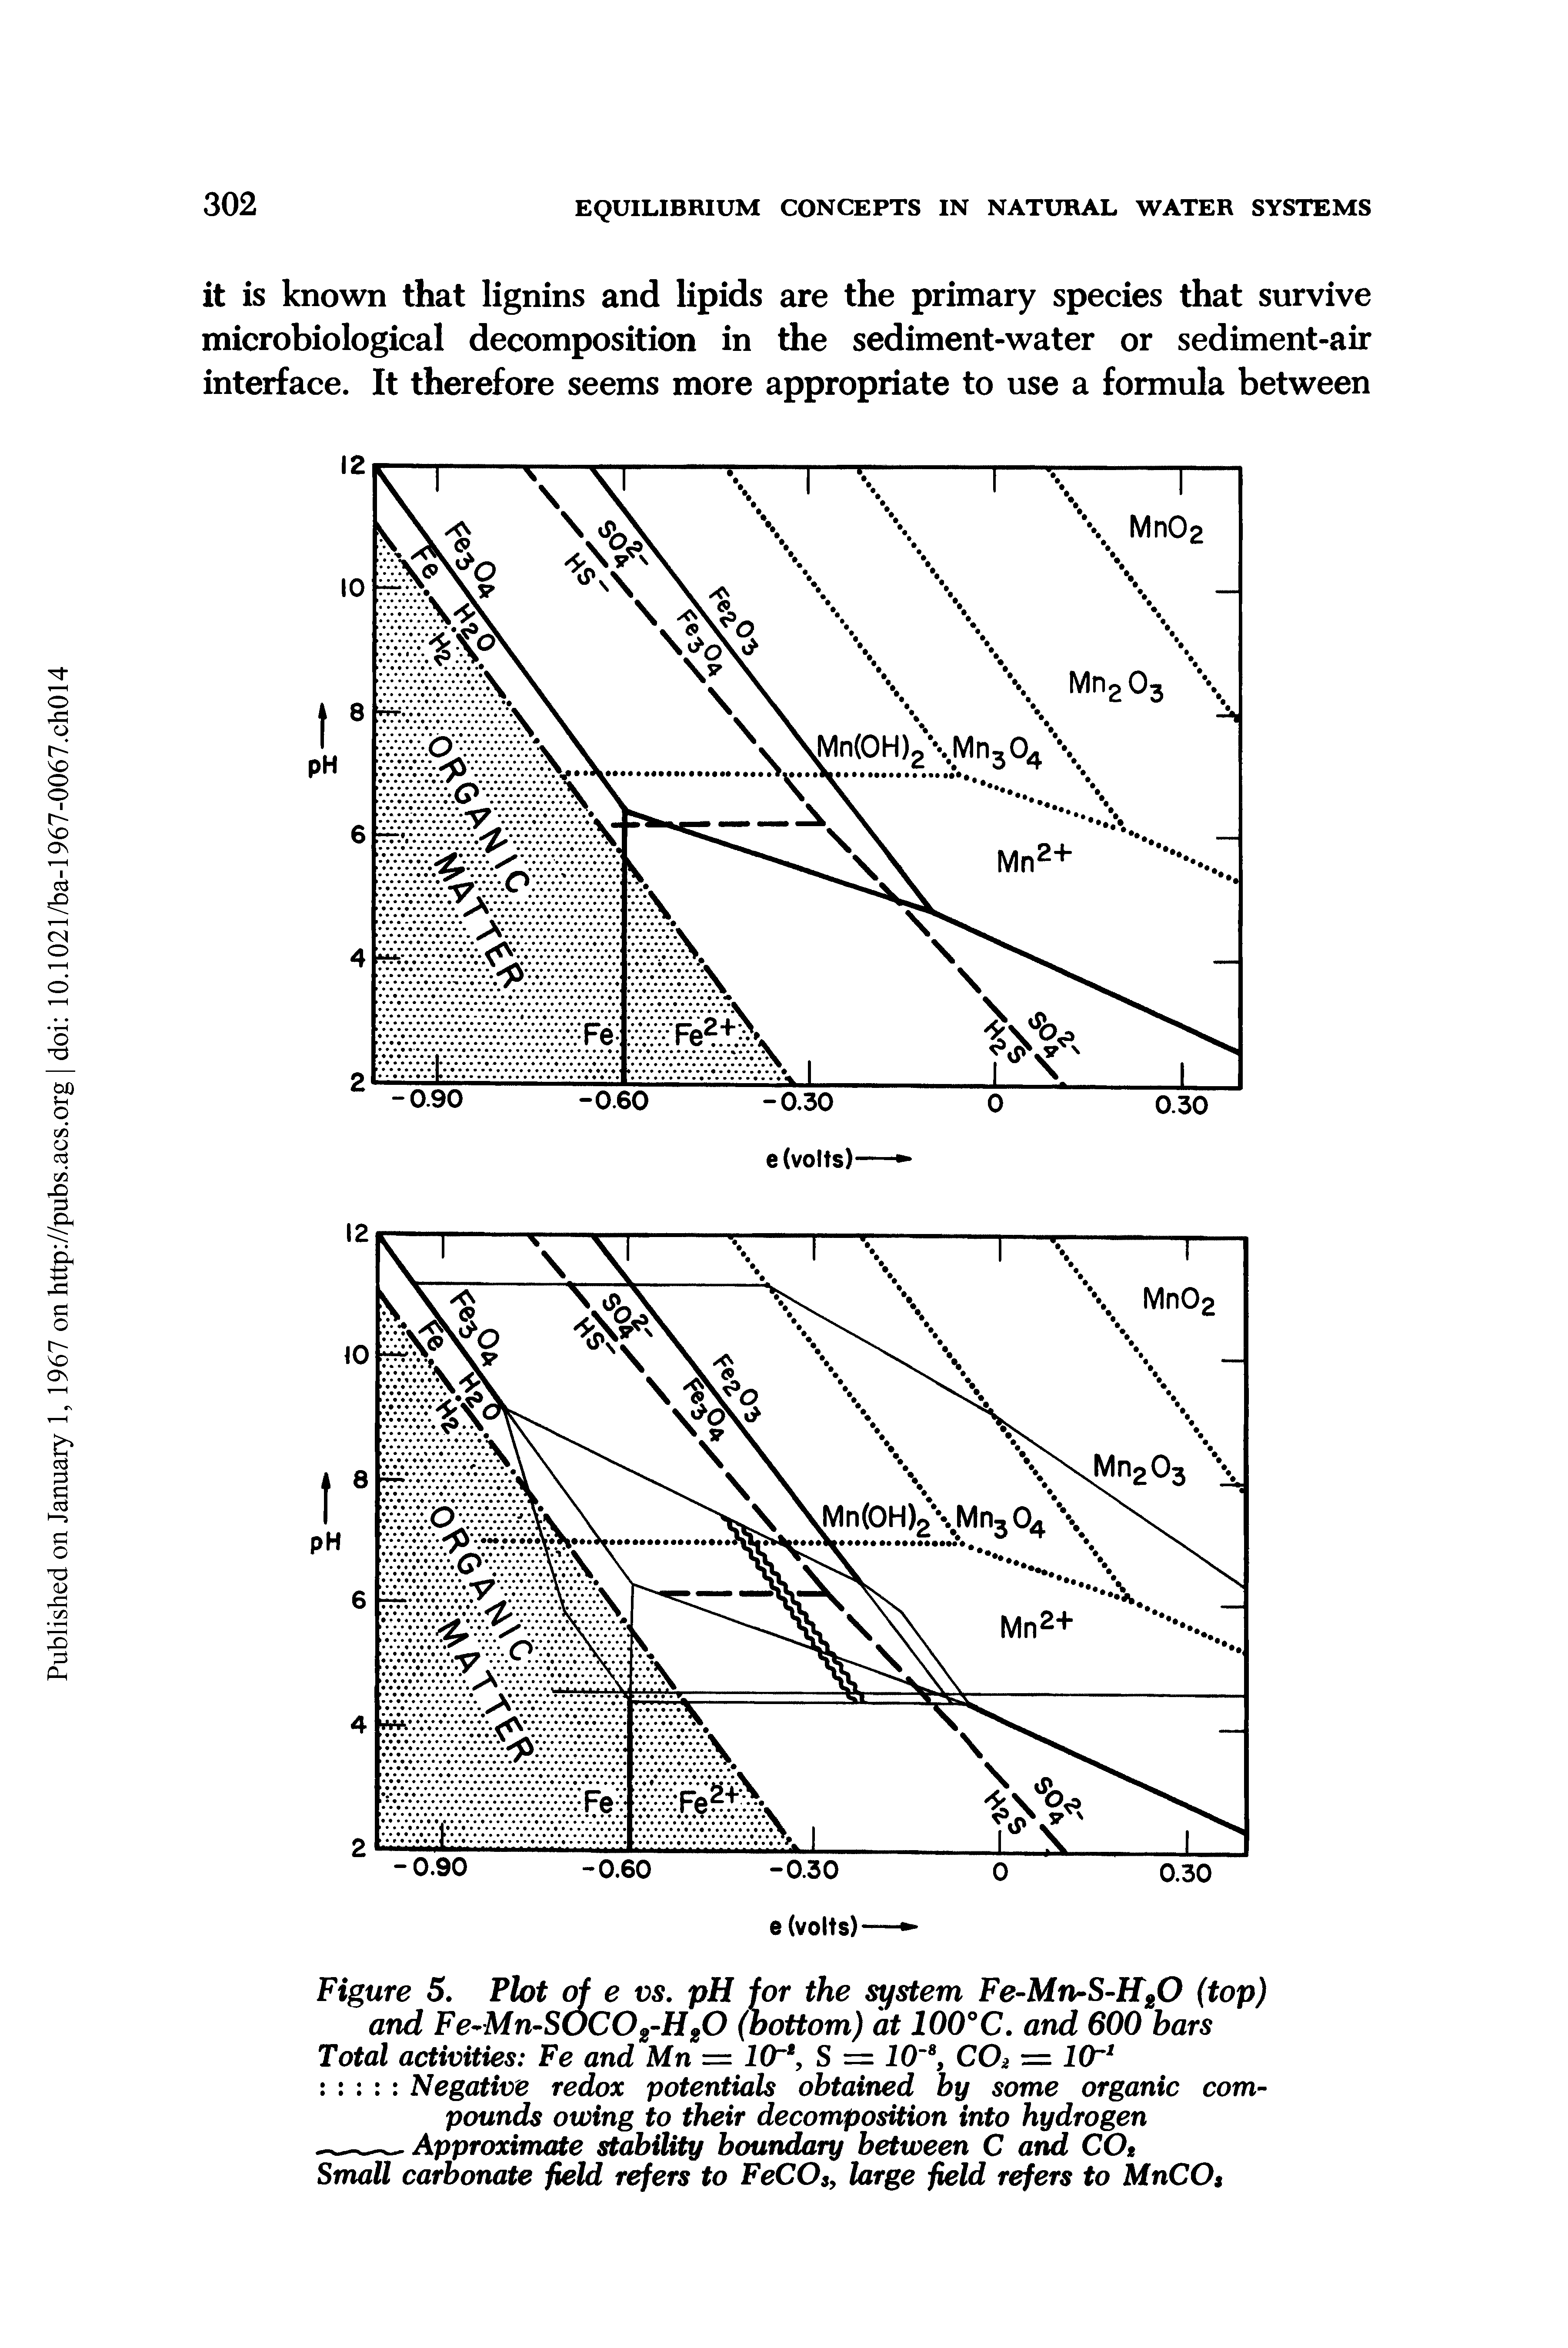 Figure 5. Plot of e vs. pH for the system Fe-Mn-S-H20 (top) and Fe-Mn-S0C02-H20 (bottom) at 100°C. and 600 bars Total activities Fe and Mn = 10, S — 10 CO = lOr1 Negative redox potentials obtained by some organic compounds owing to their decomposition into hydrogen...